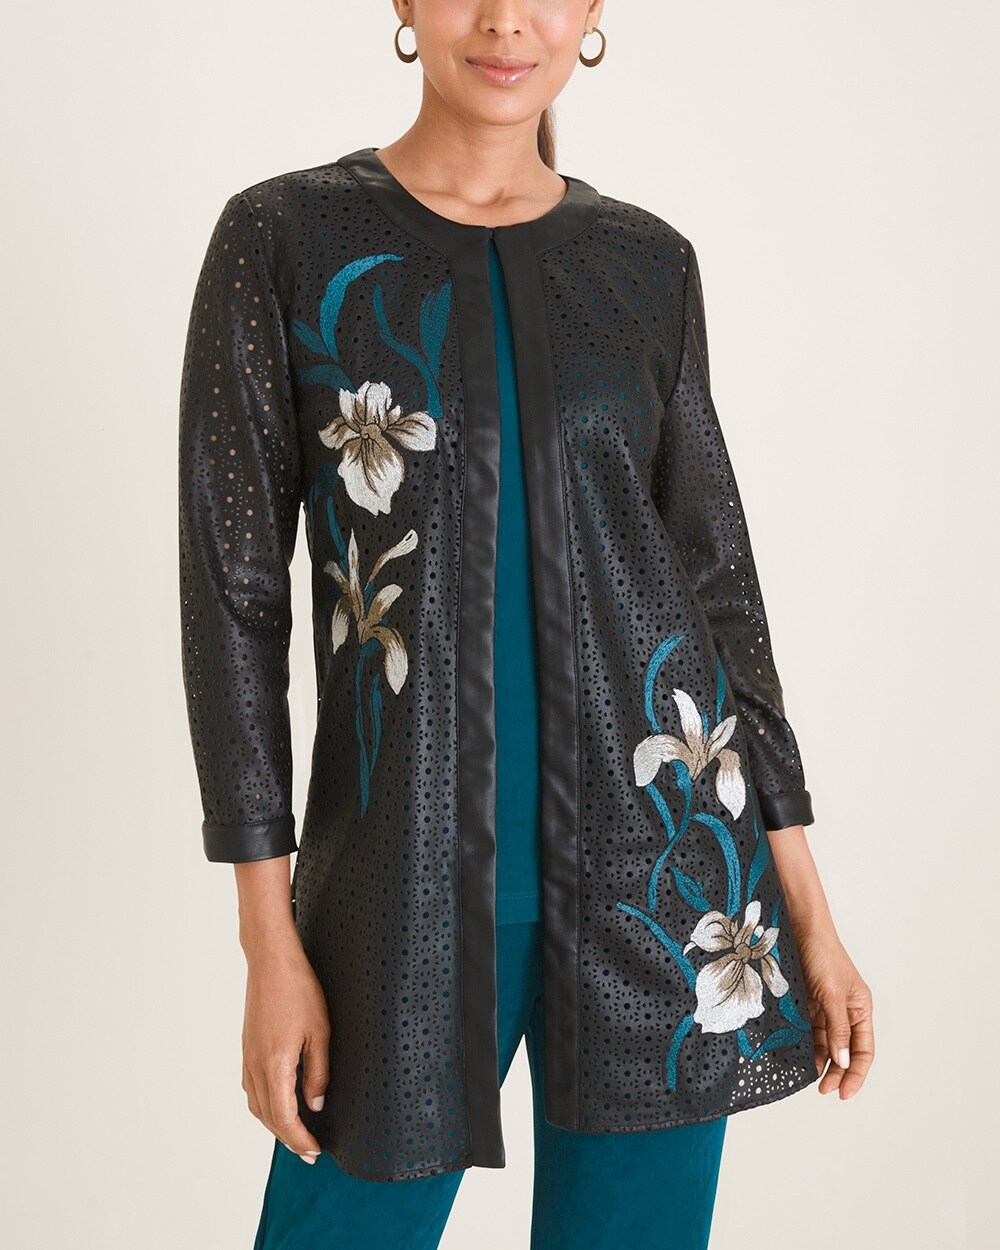 Travelers Collection Floral-Embroidered Faux-Leather Jacket